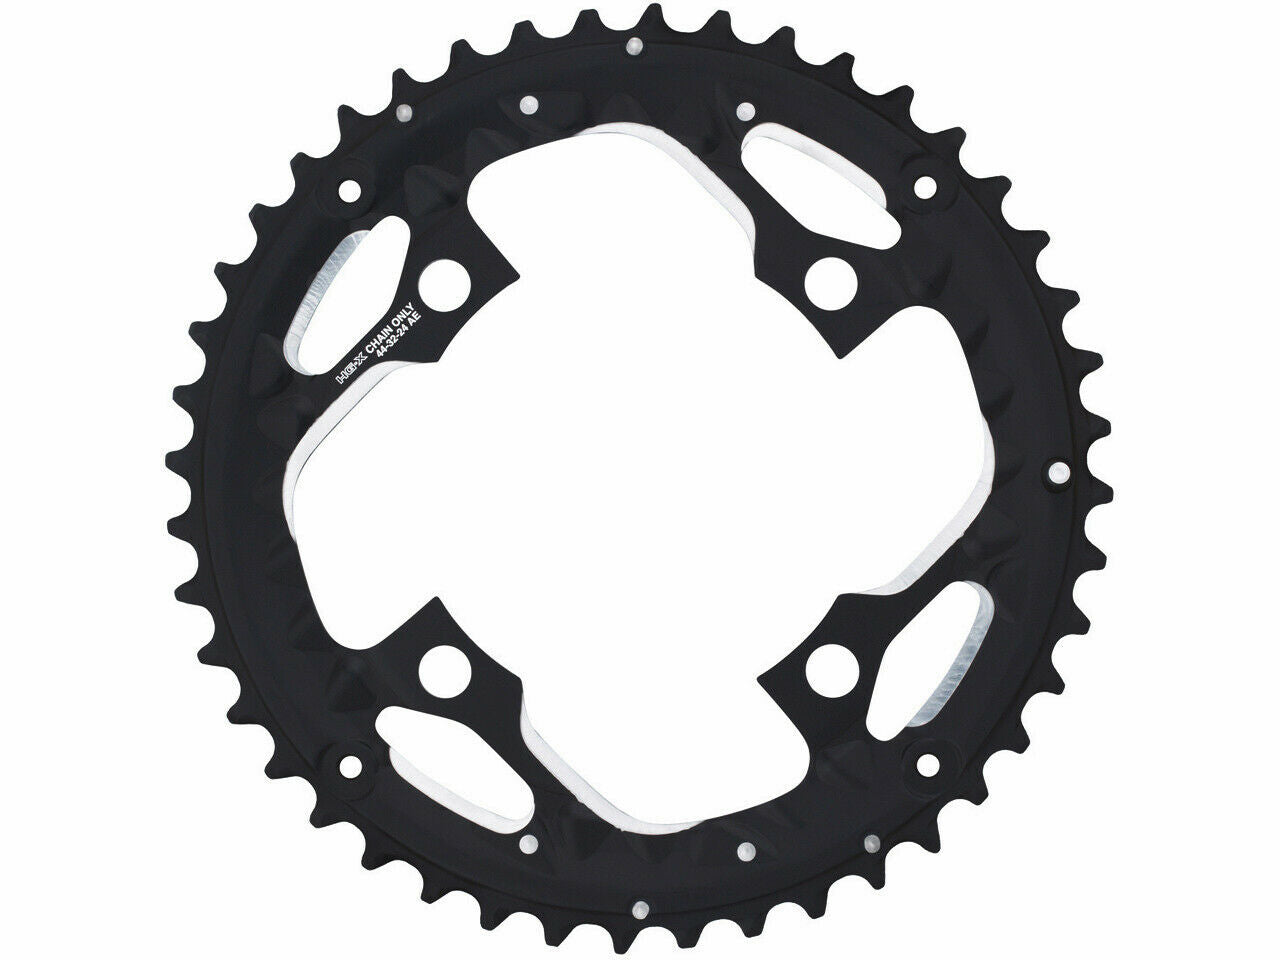 Shimano Deore XT FC-T781 44T Outer Chainring - 104mm BCD - 4 Arm - AE Type - Sportandleisure.com (7506693980417)